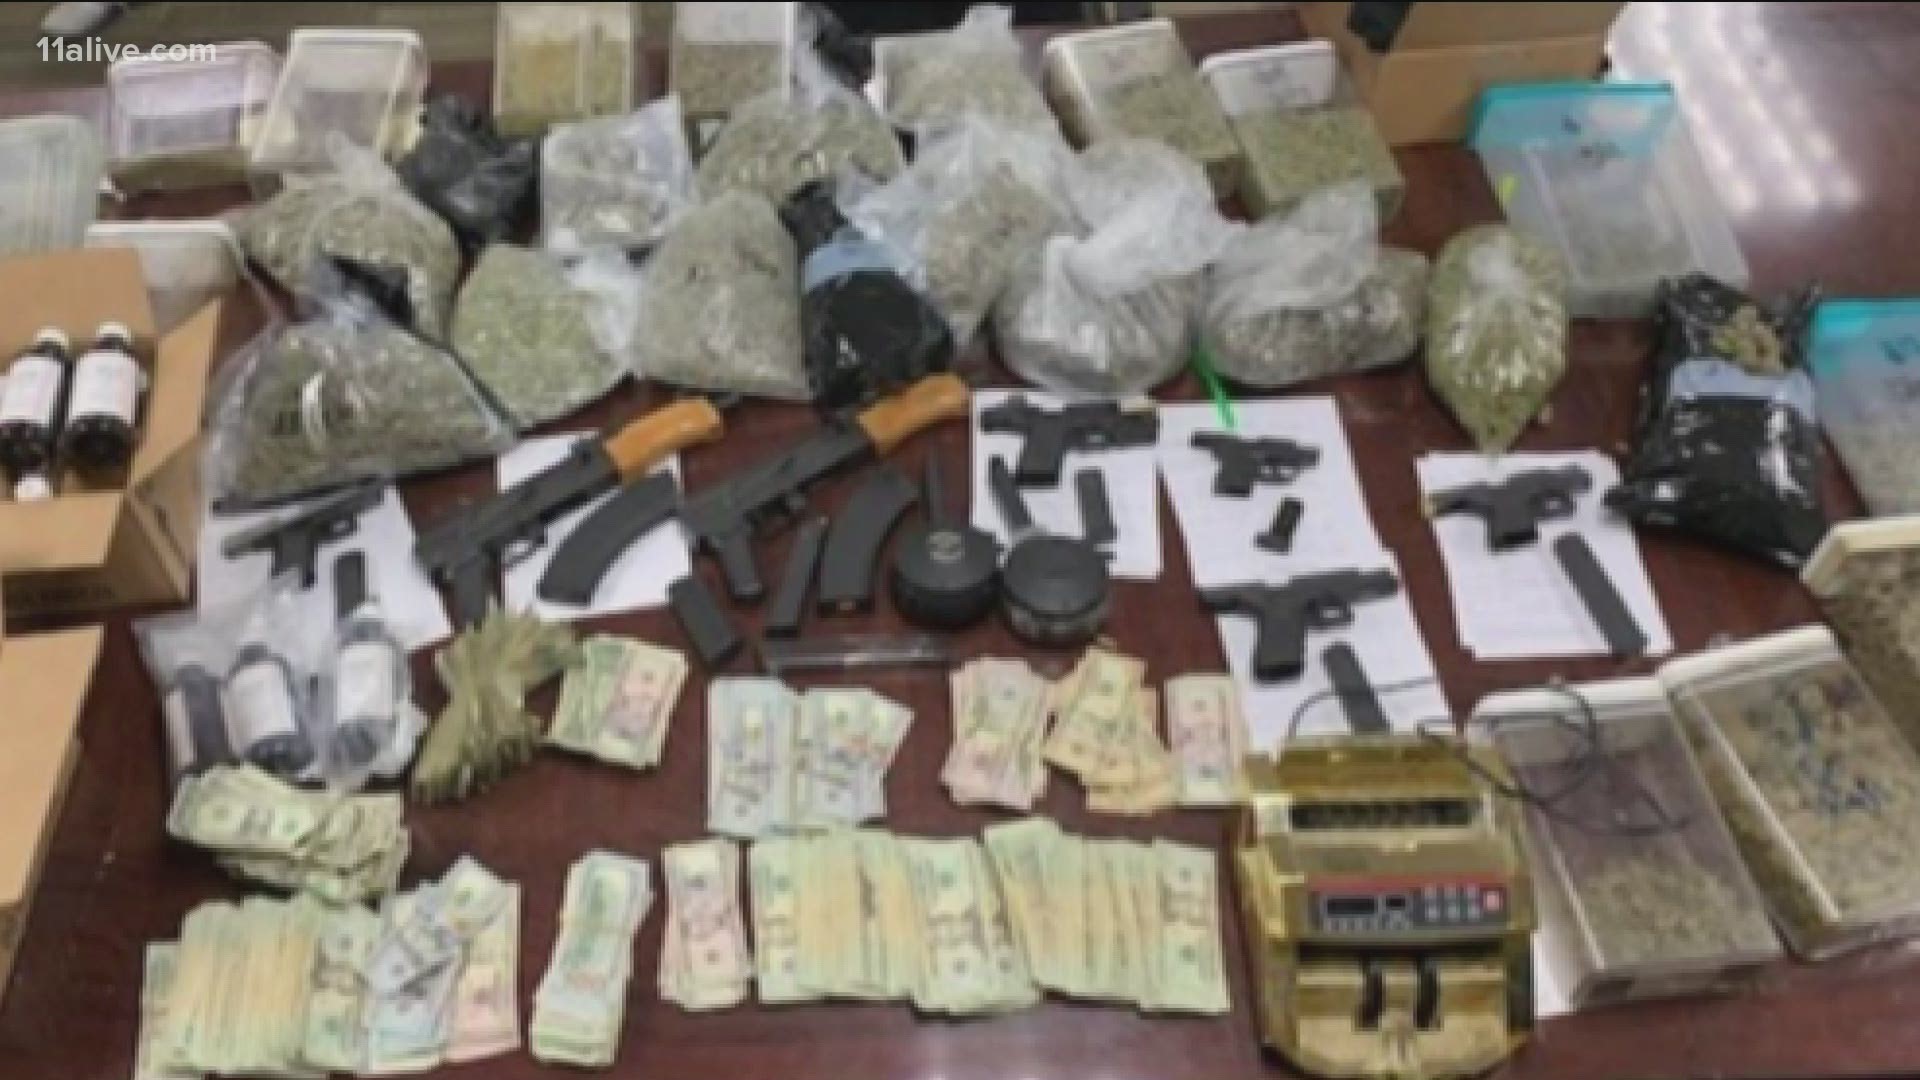 Atlanta Drug Bust Uncovers Pounds Pints Of Drugs Modified Weapons And 